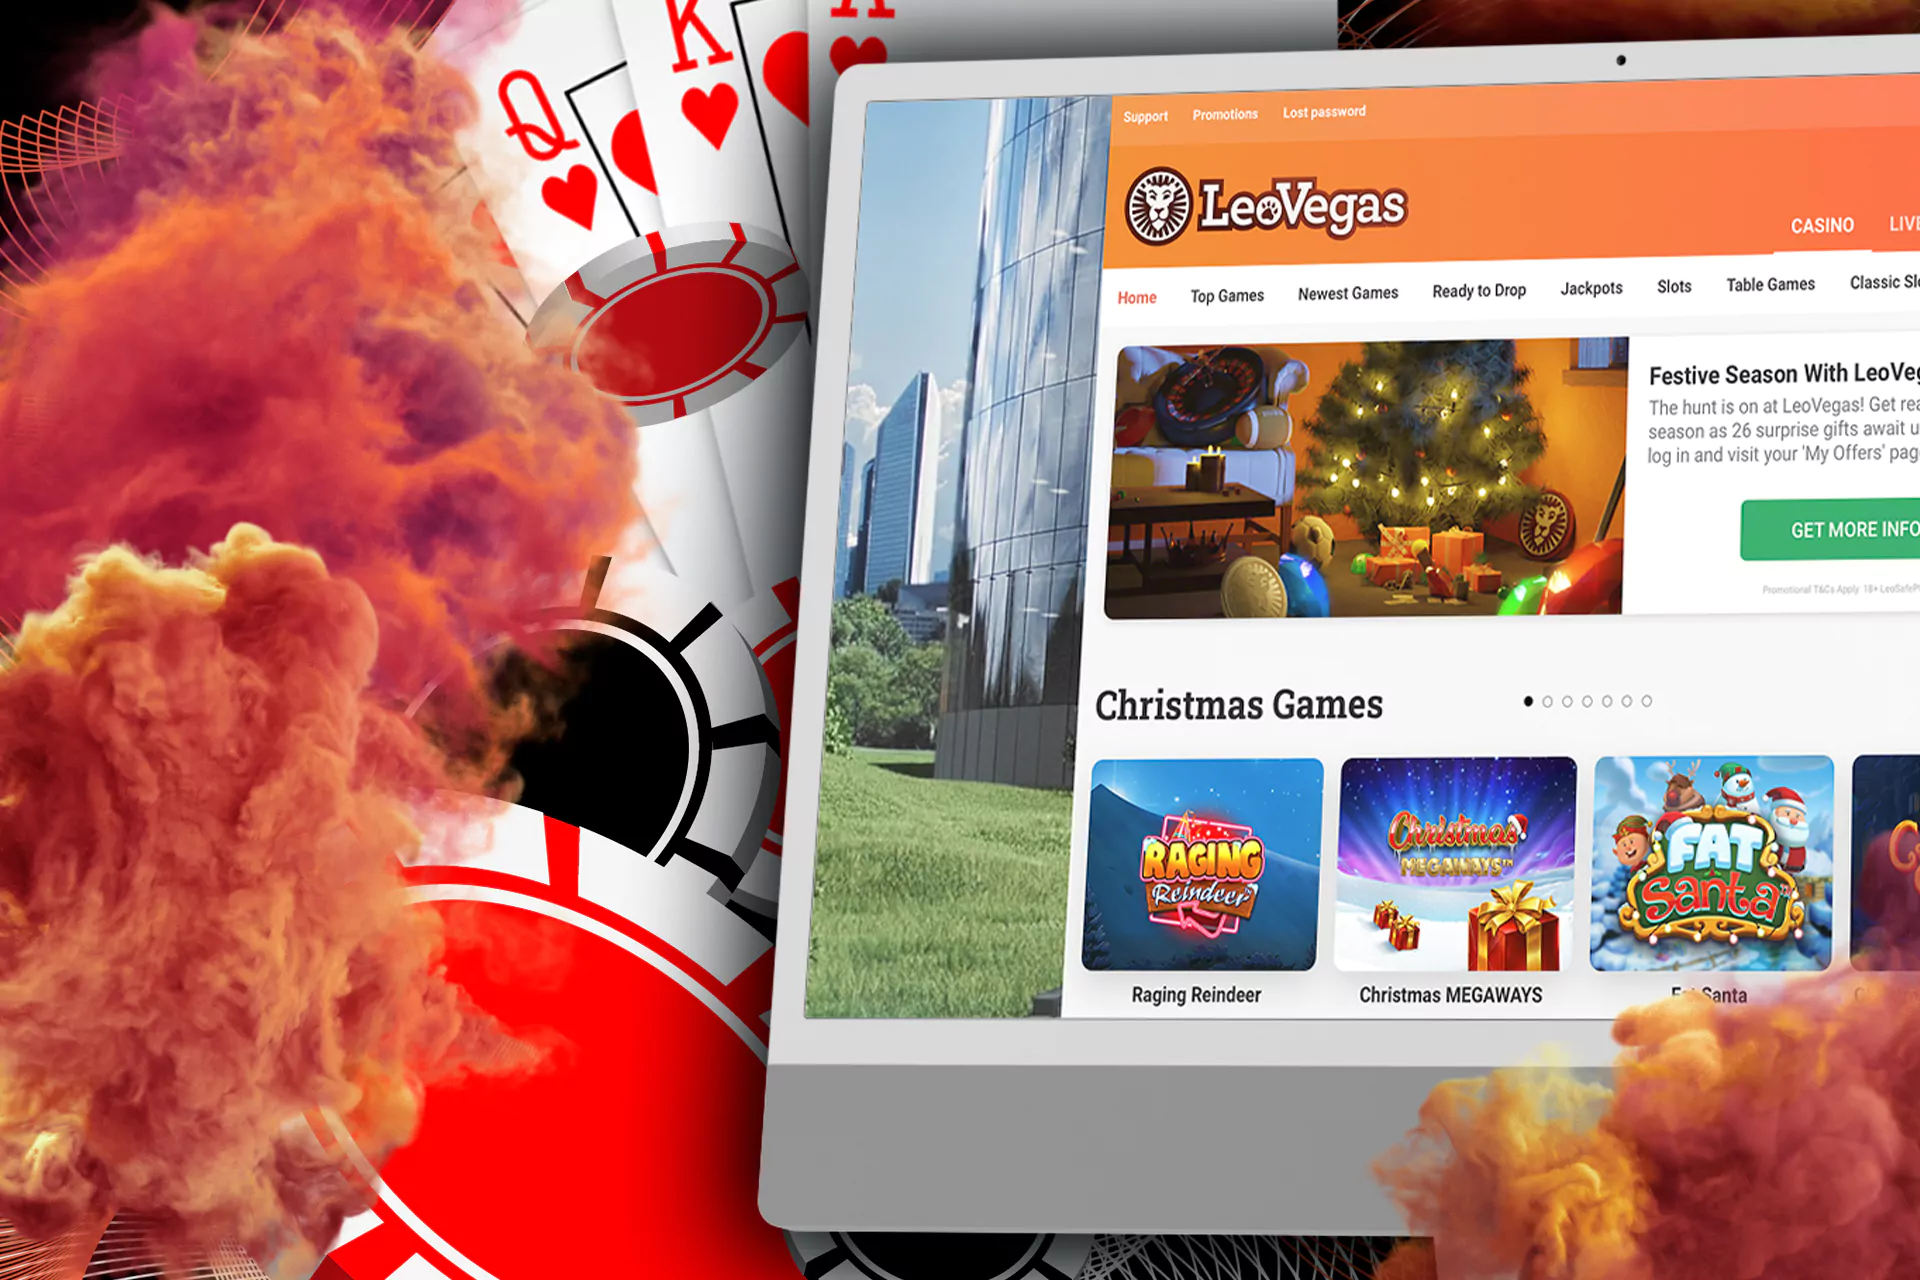 Play your favorite casino games at LeoVegas.